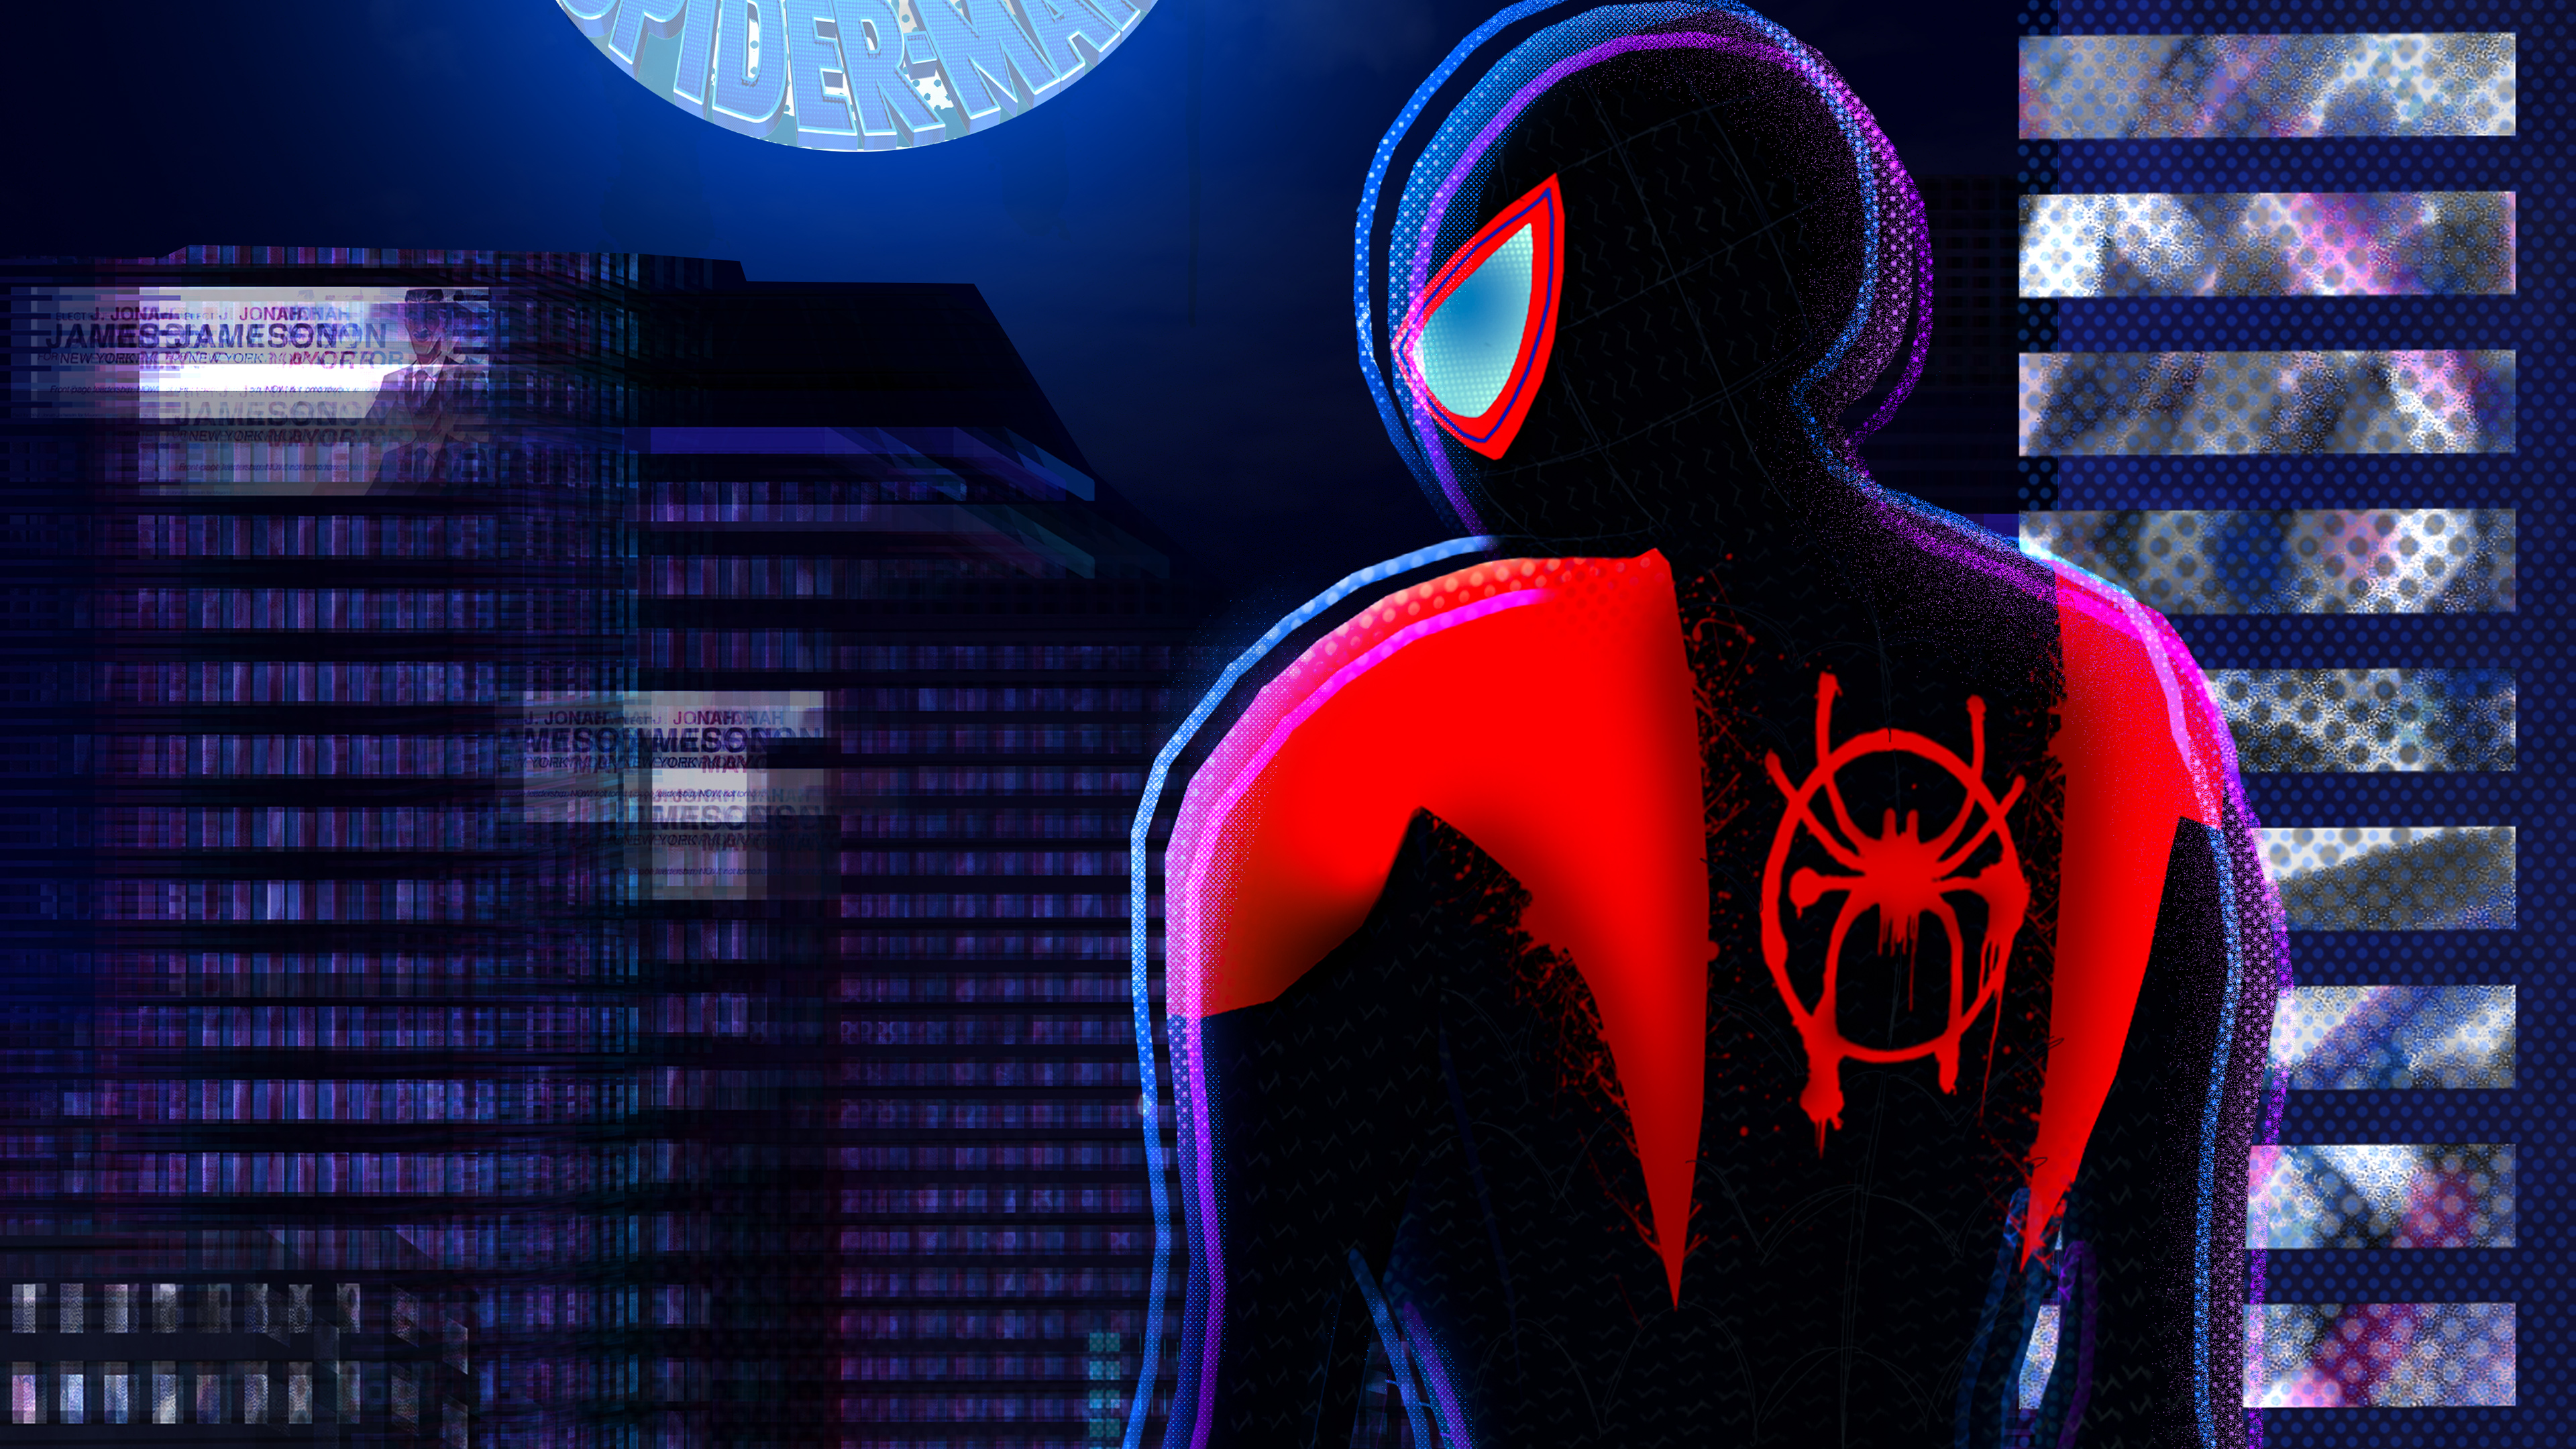 Spider-Man: Into The Spider-Verse 4k Ultra HD Wallpaper by C.V Art